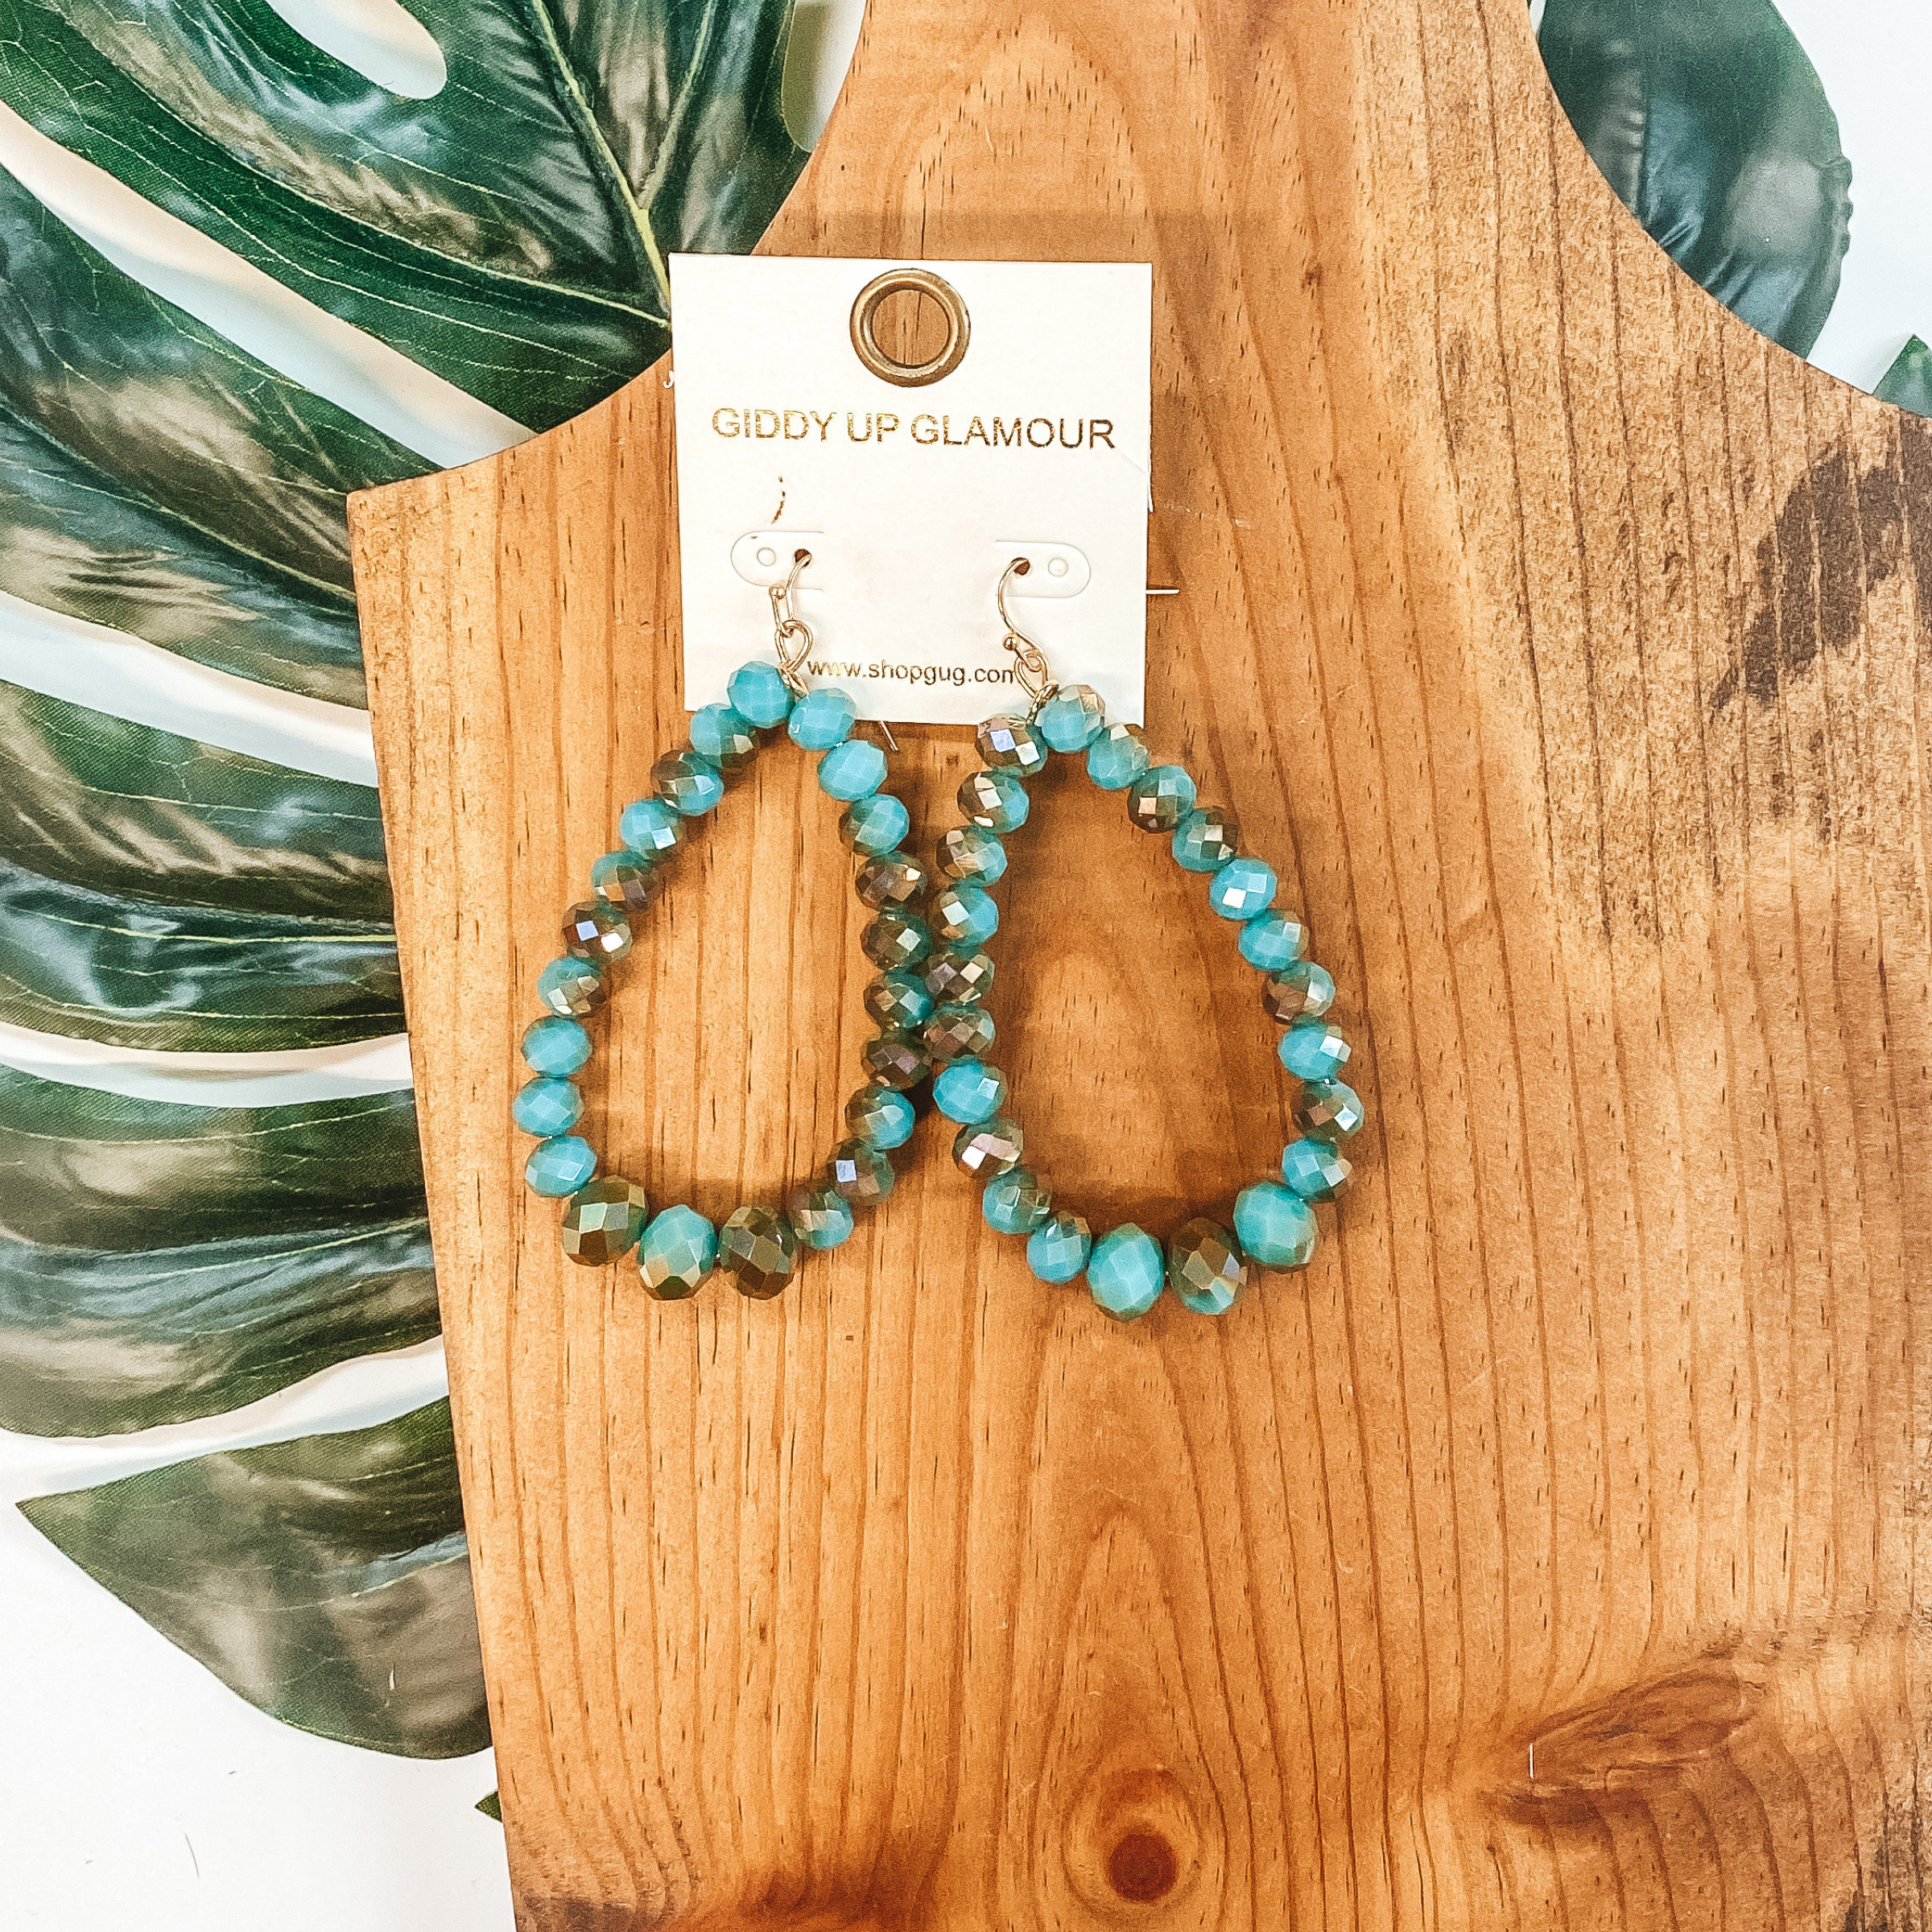 Crystal  Beaded Teardrop Earrings in Turquoise and Bronze Mix - Giddy Up Glamour Boutique